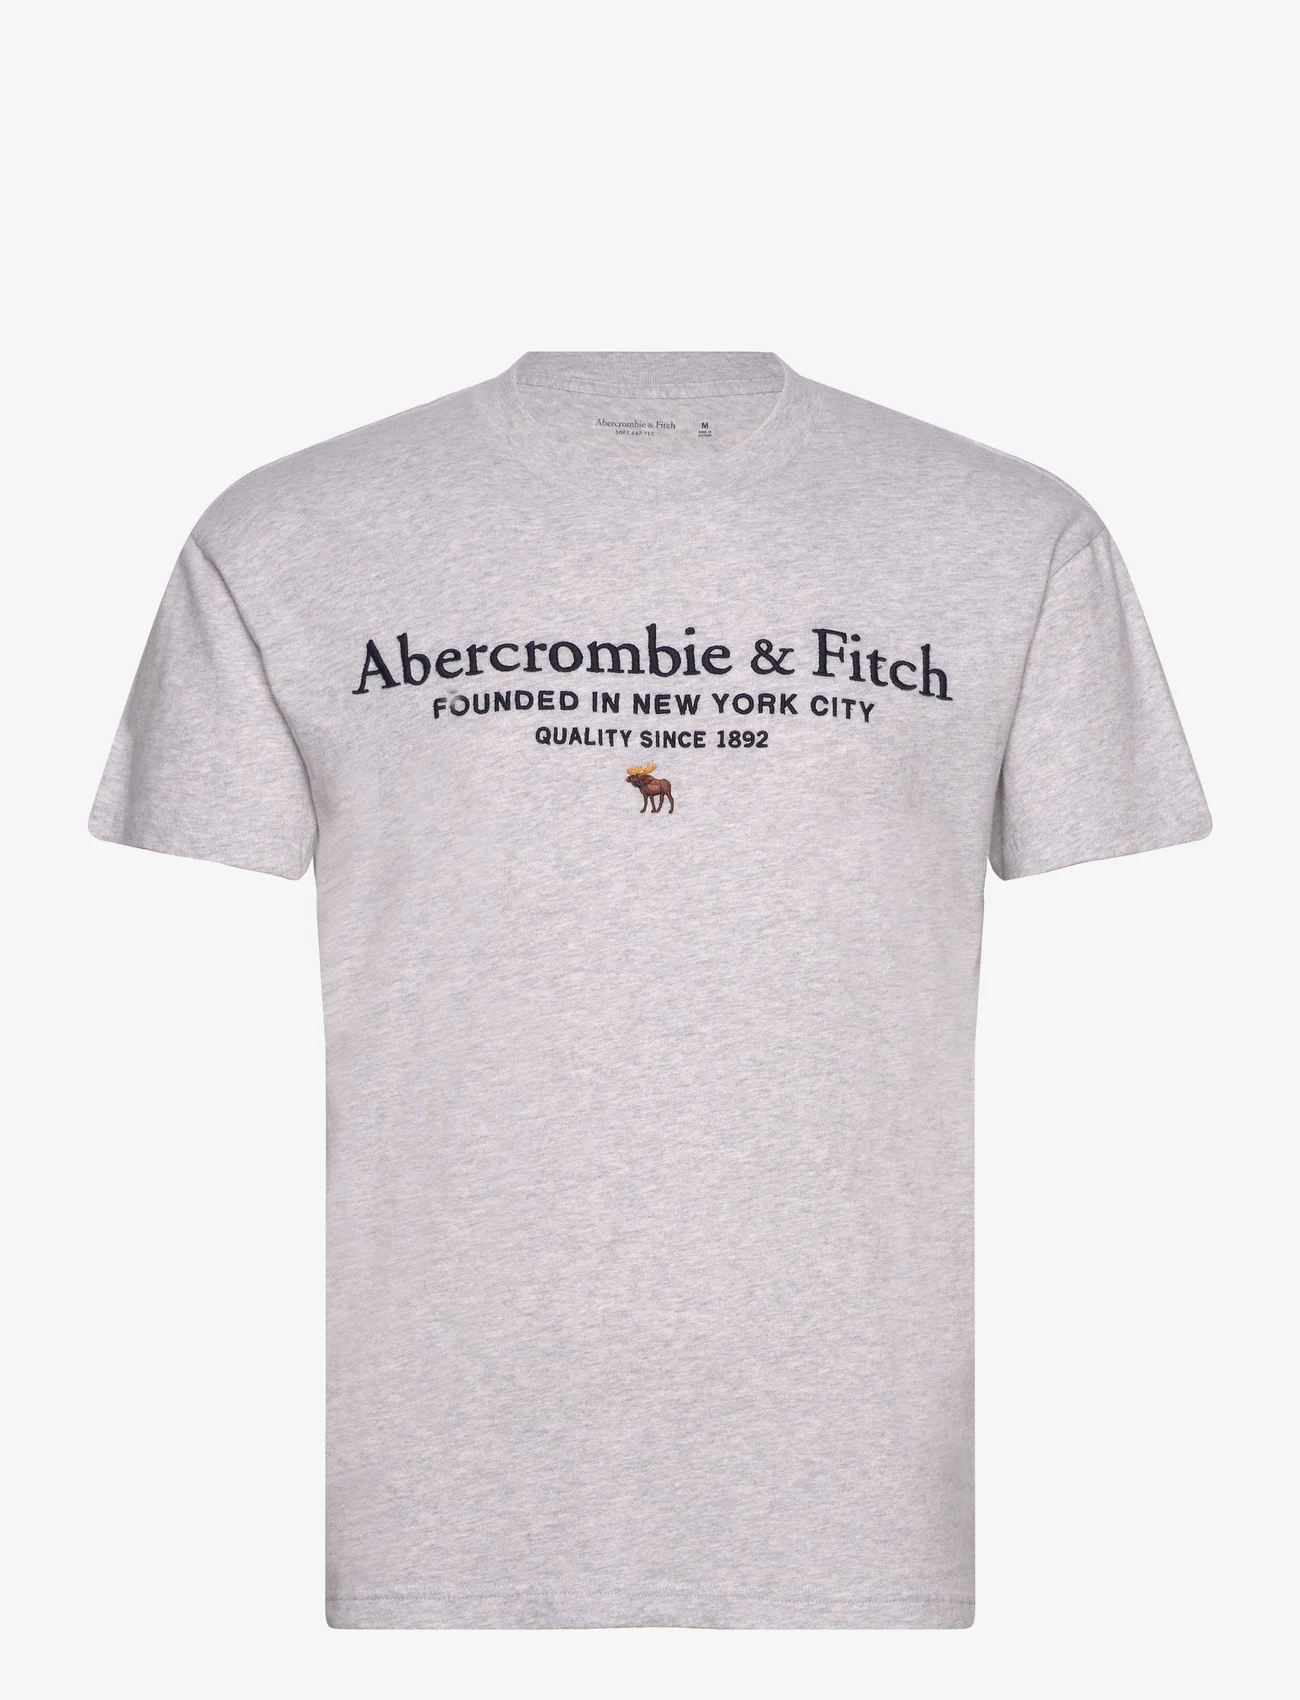 Abercrombie & Fitch - ANF MENS GRAPHICS - short-sleeved t-shirts - heather grey - 0